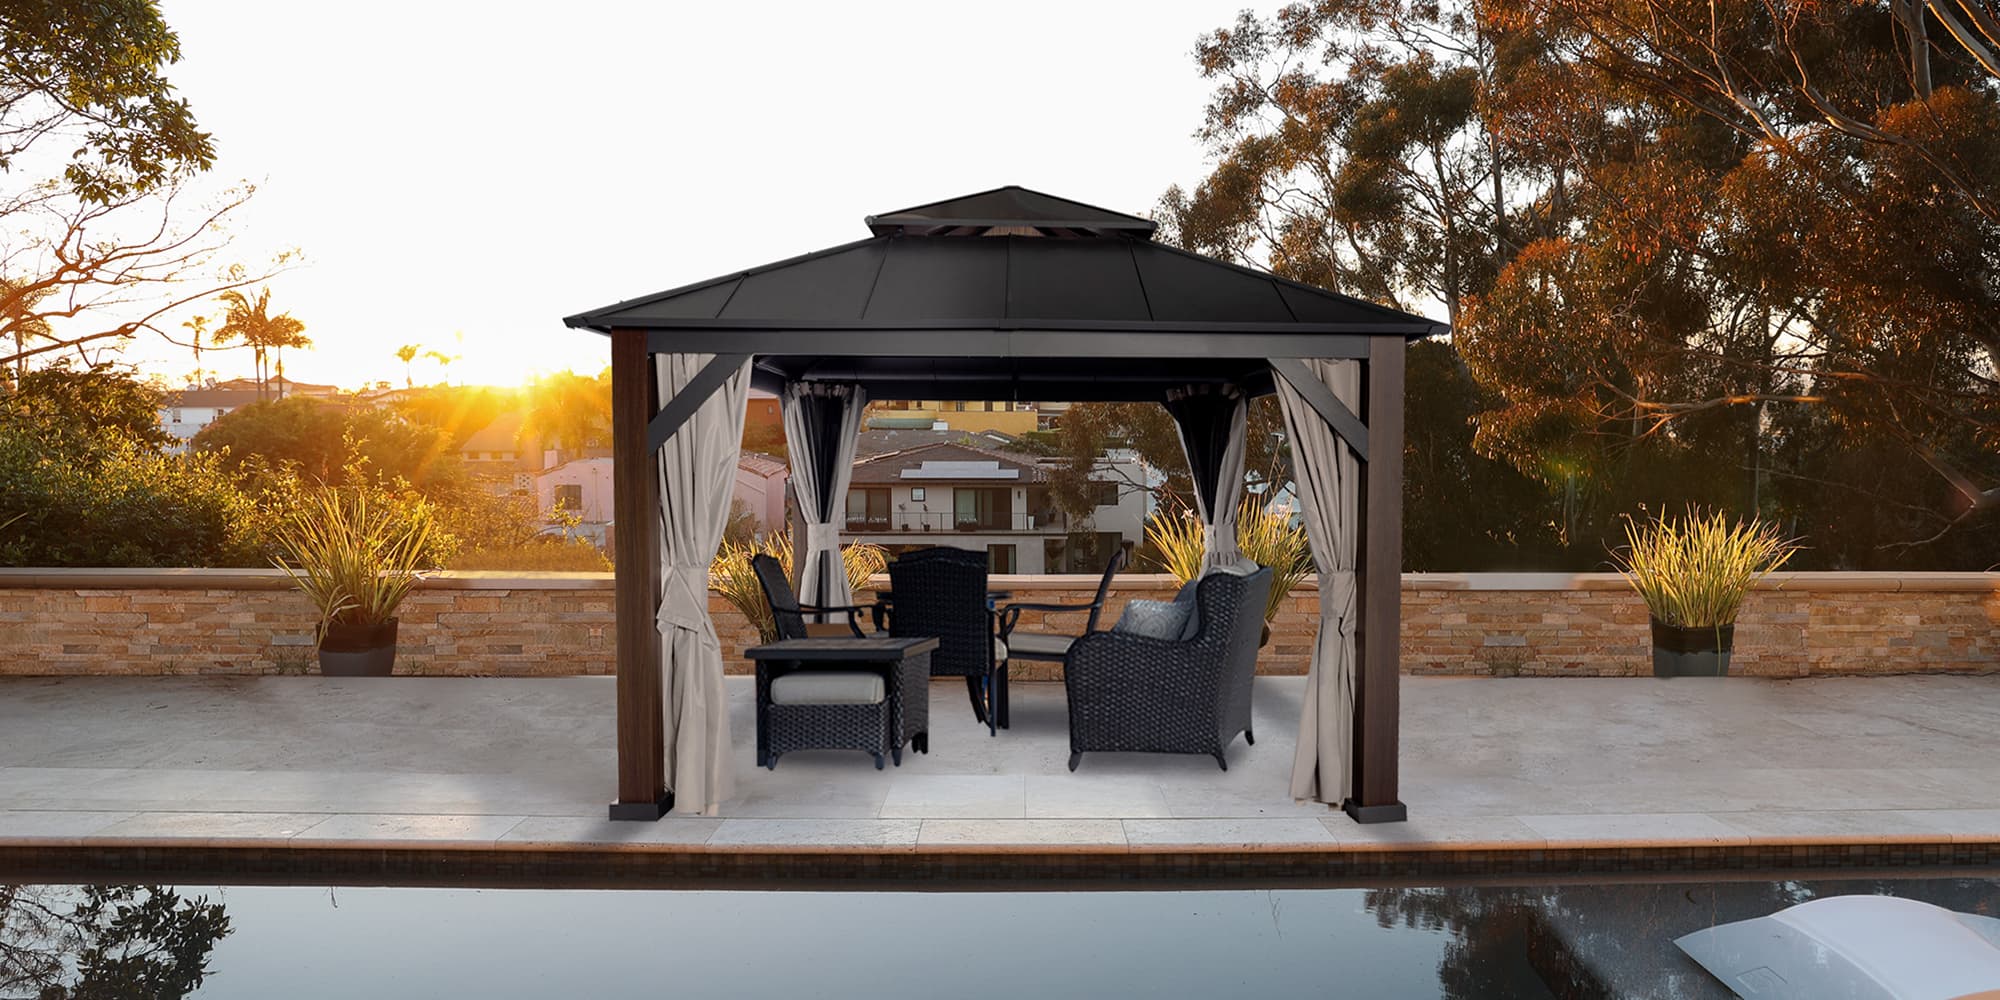 What Is A Gazebo? Why Do You Need One for Your Backyard or Garden?